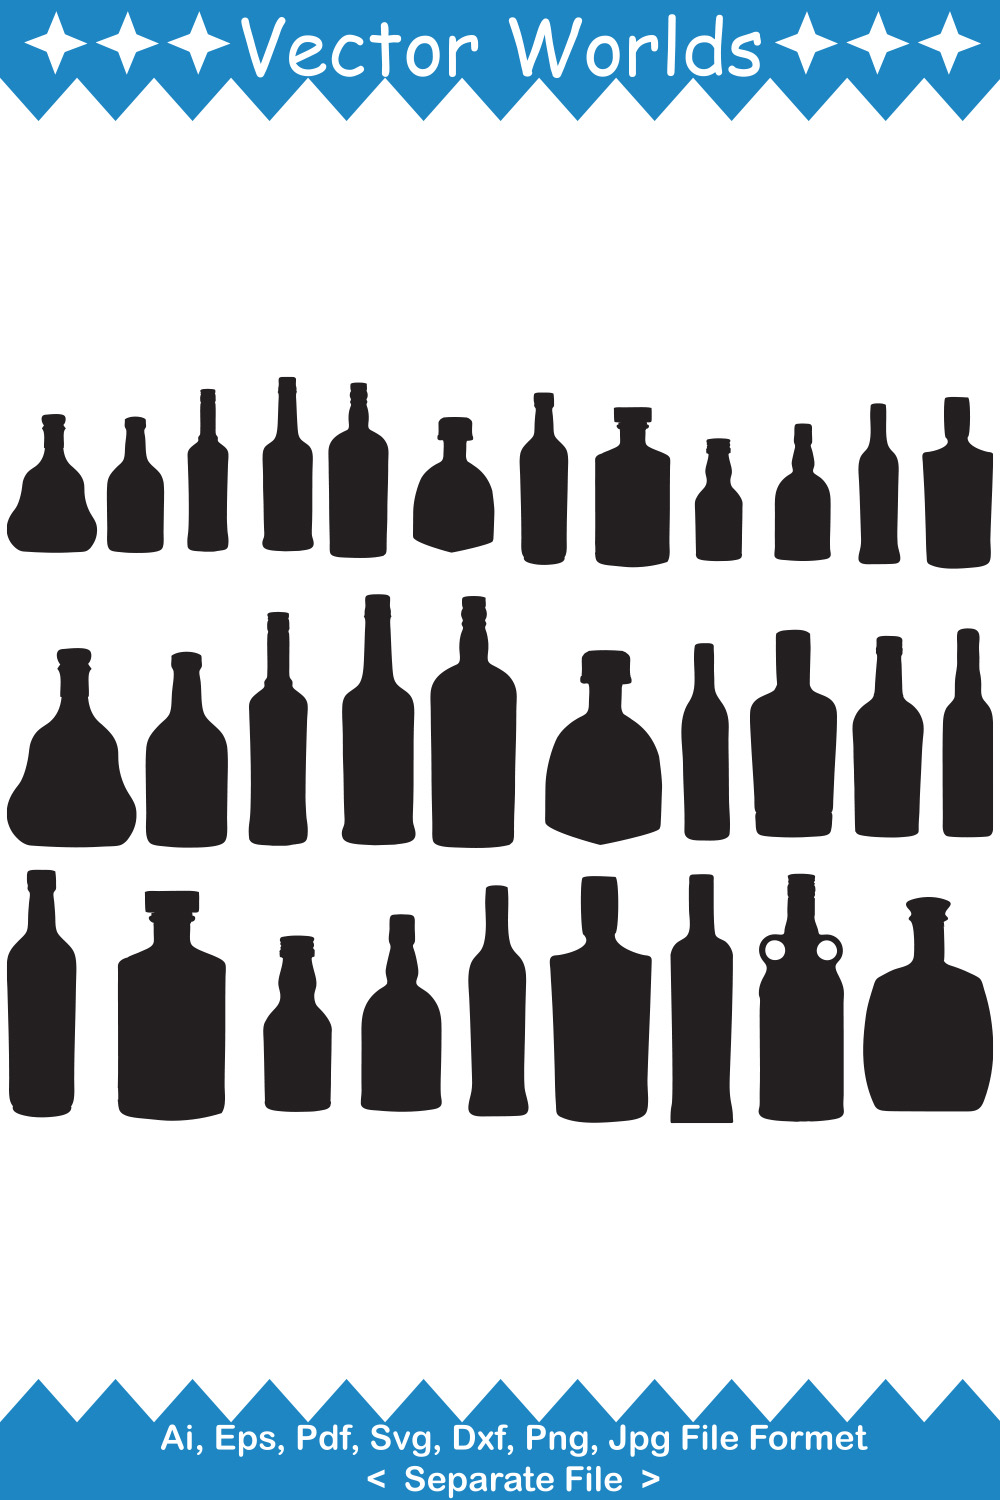 Set of beautiful vector images of alcohol bottles.